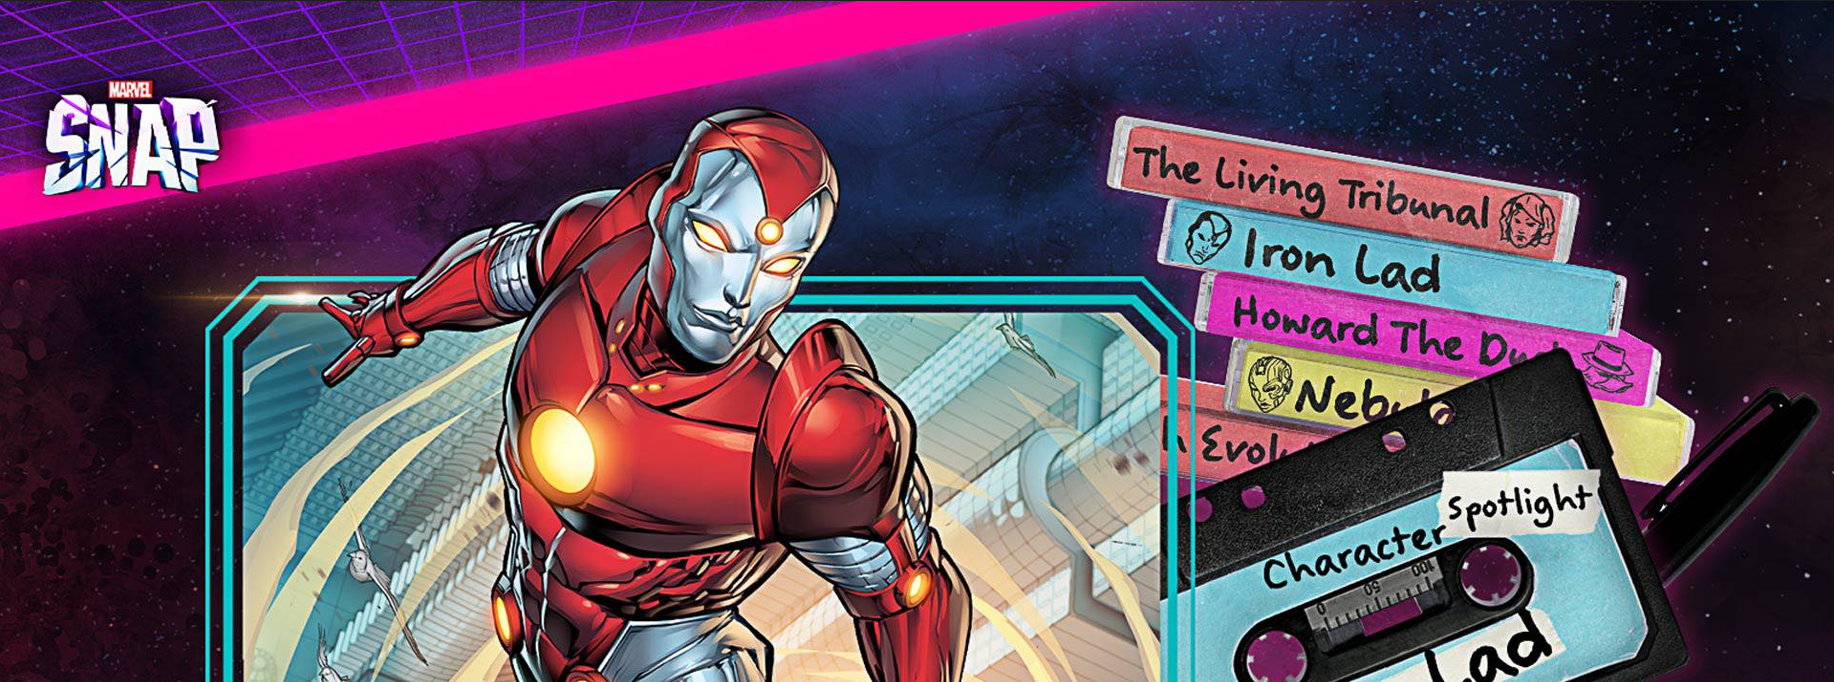 Marvel Snap: Iron Lad Decks and Synergies